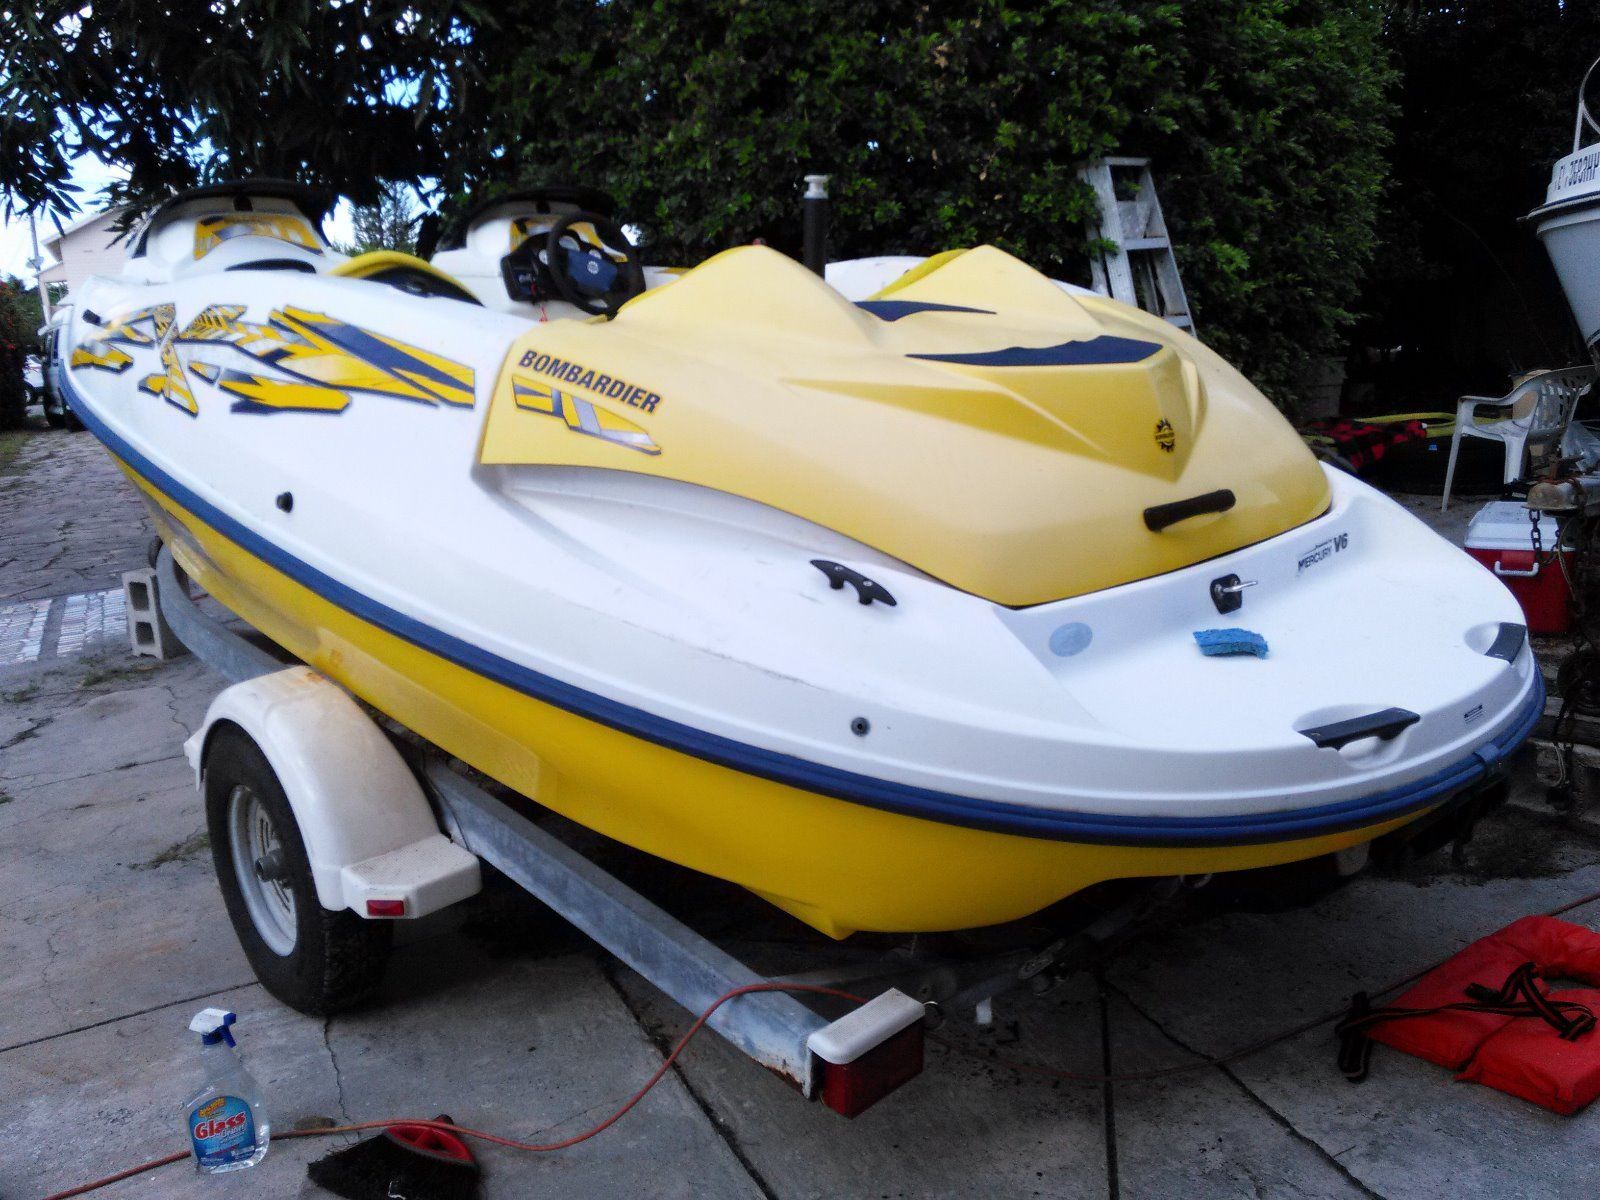 Sea Doo Sk 2000 for sale for $5,000 - Boats-from-USA.com